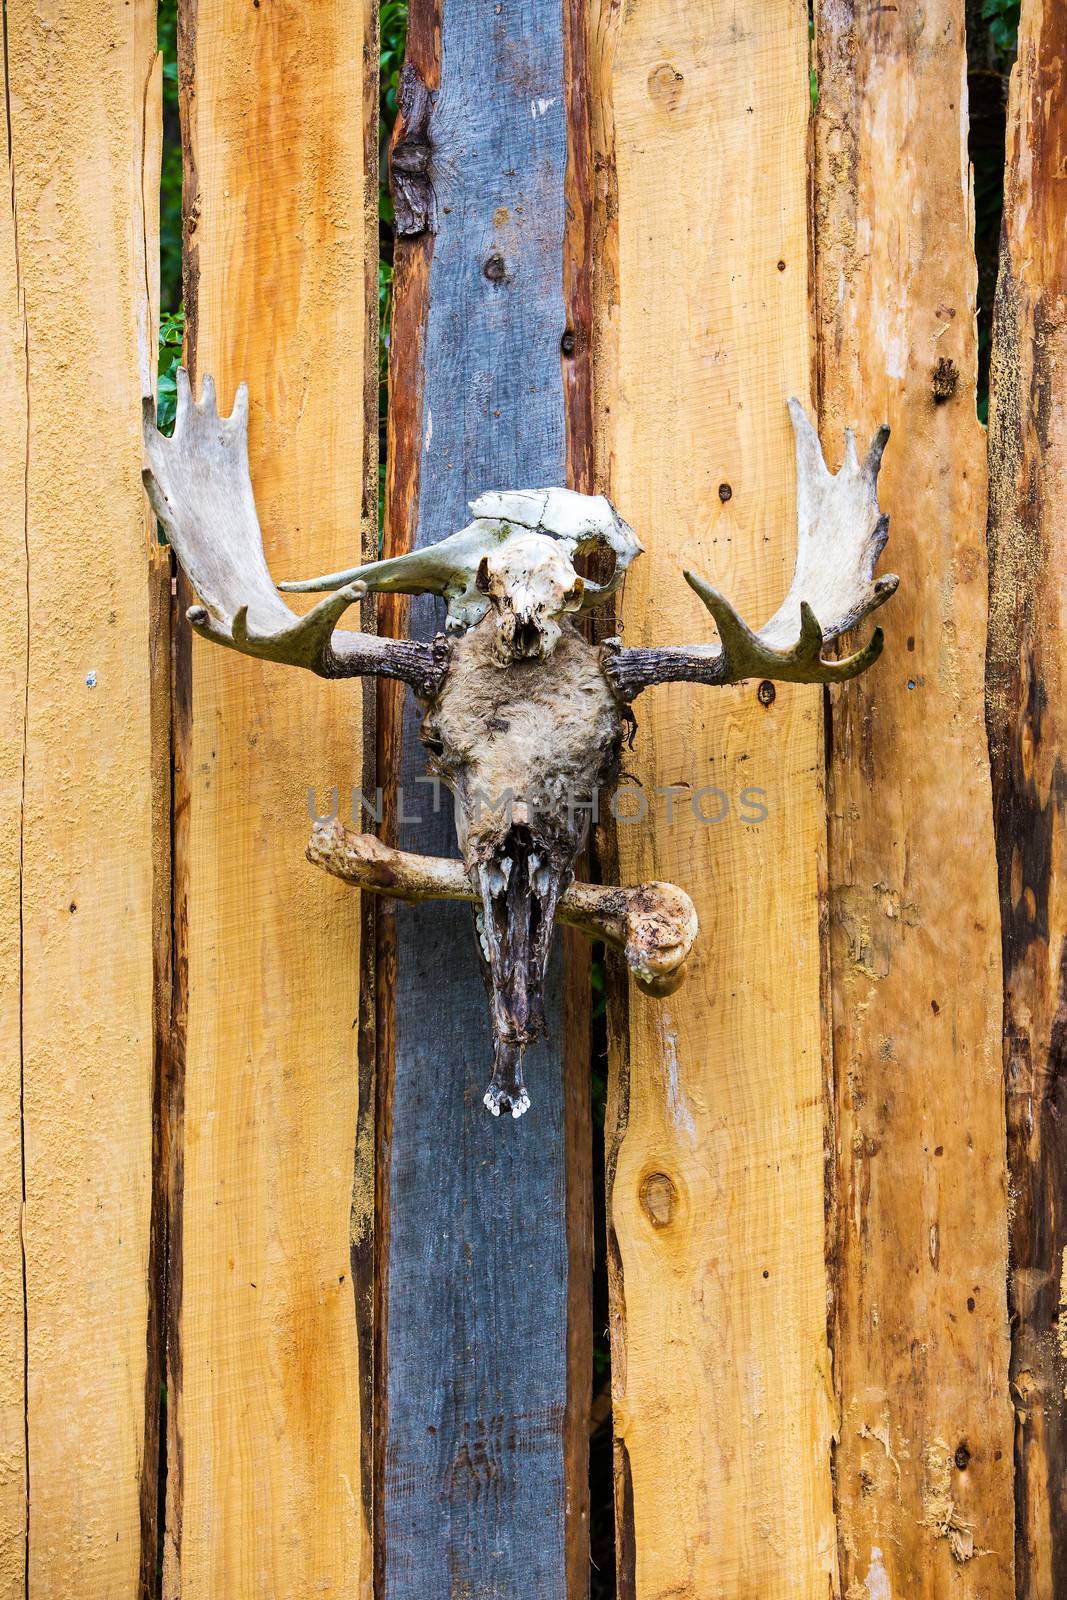 Moose skulls and antlers on a wood plank fence